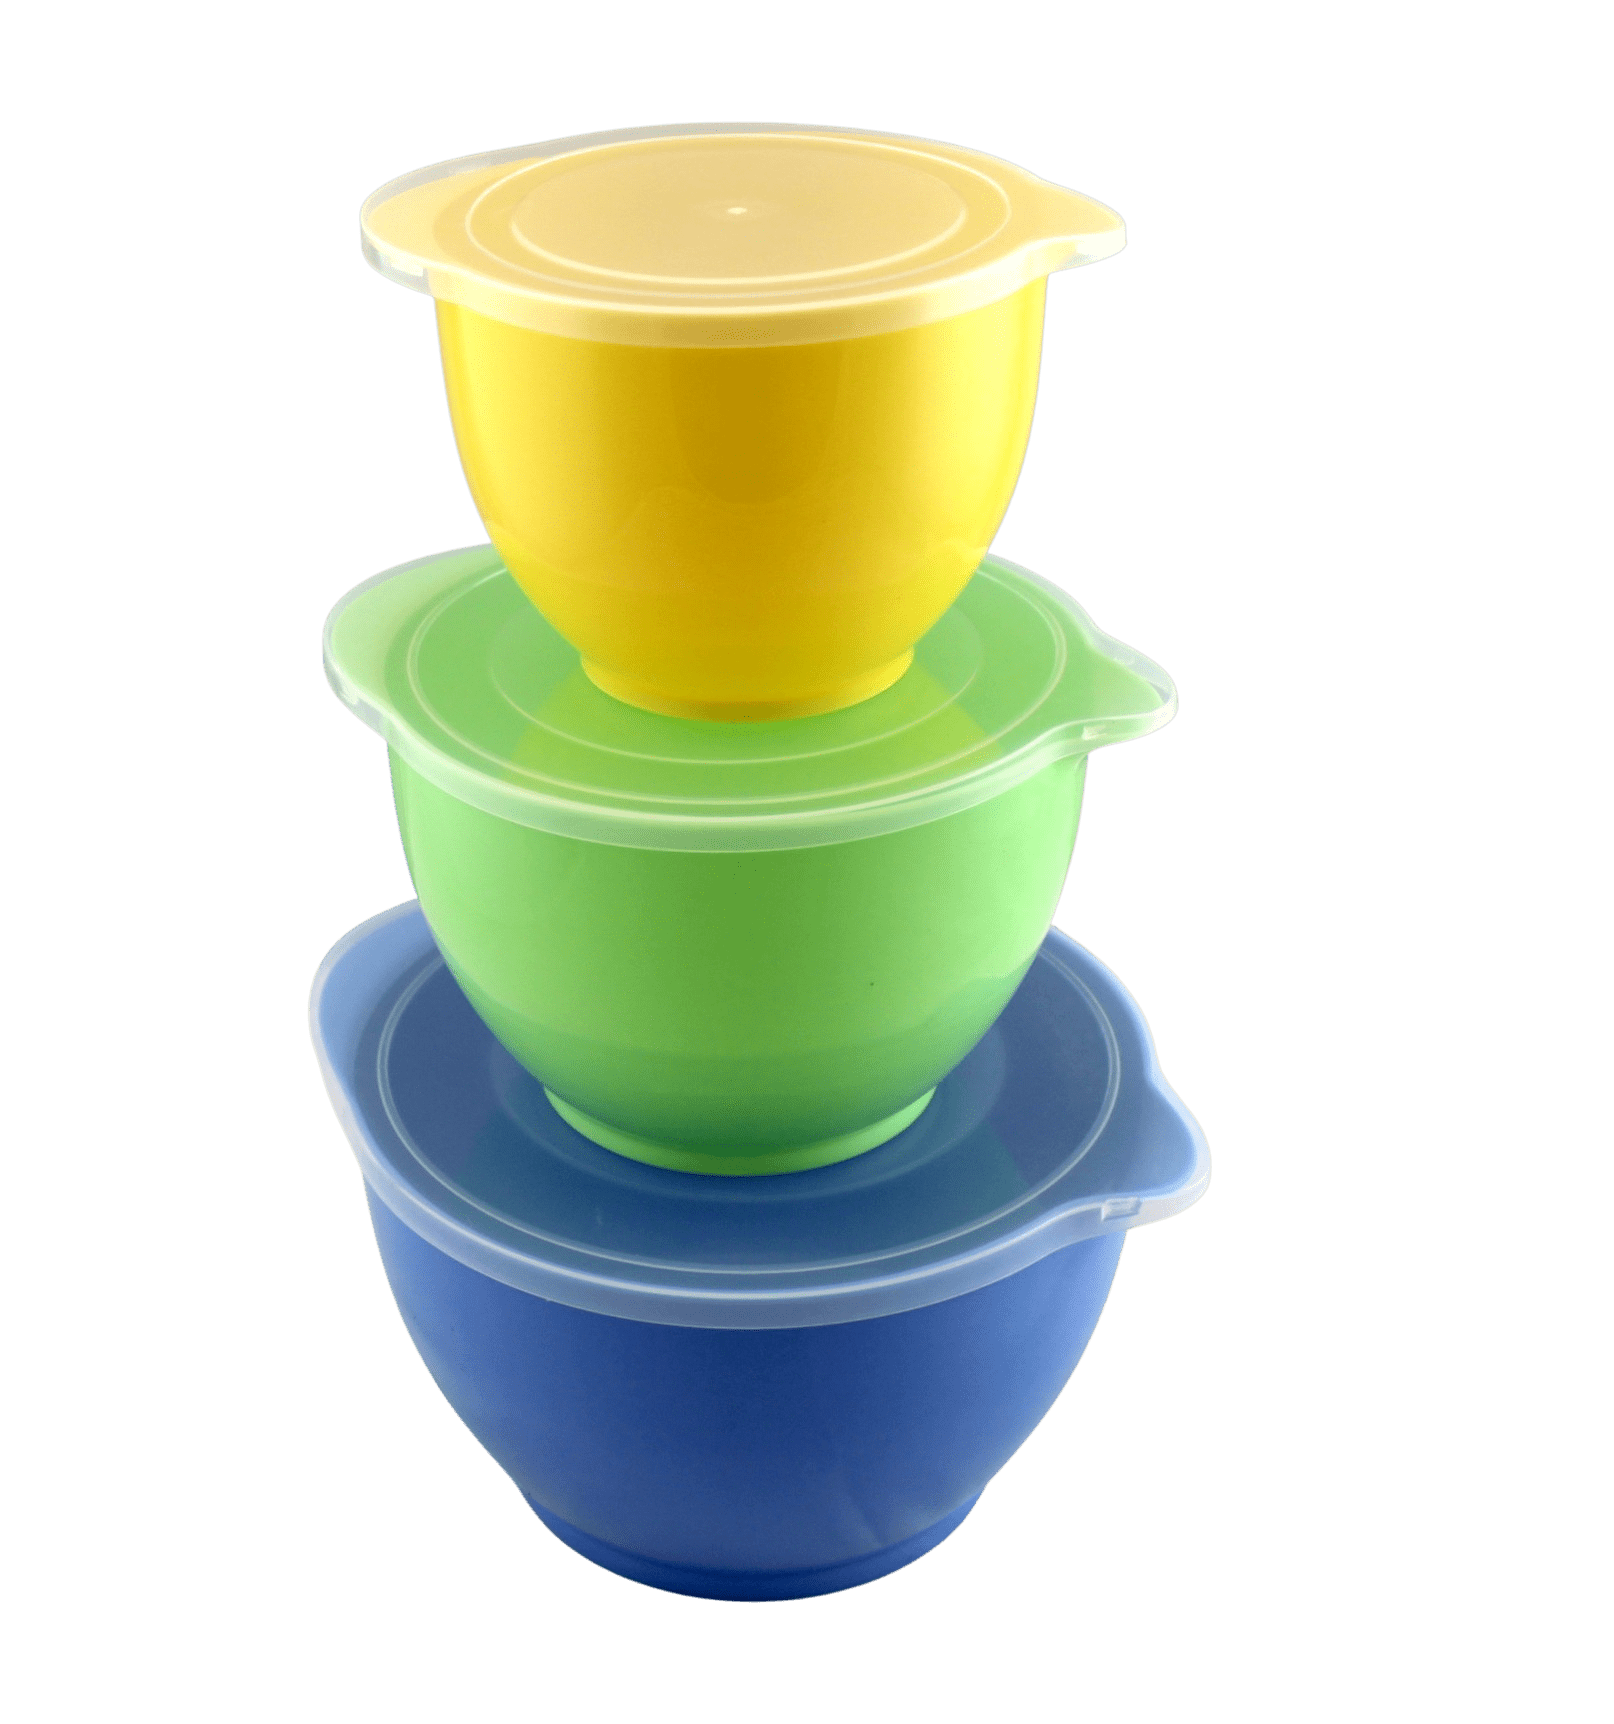 This Inexpensive Set of Mixing Bowls with Lids Are The Best I've Used